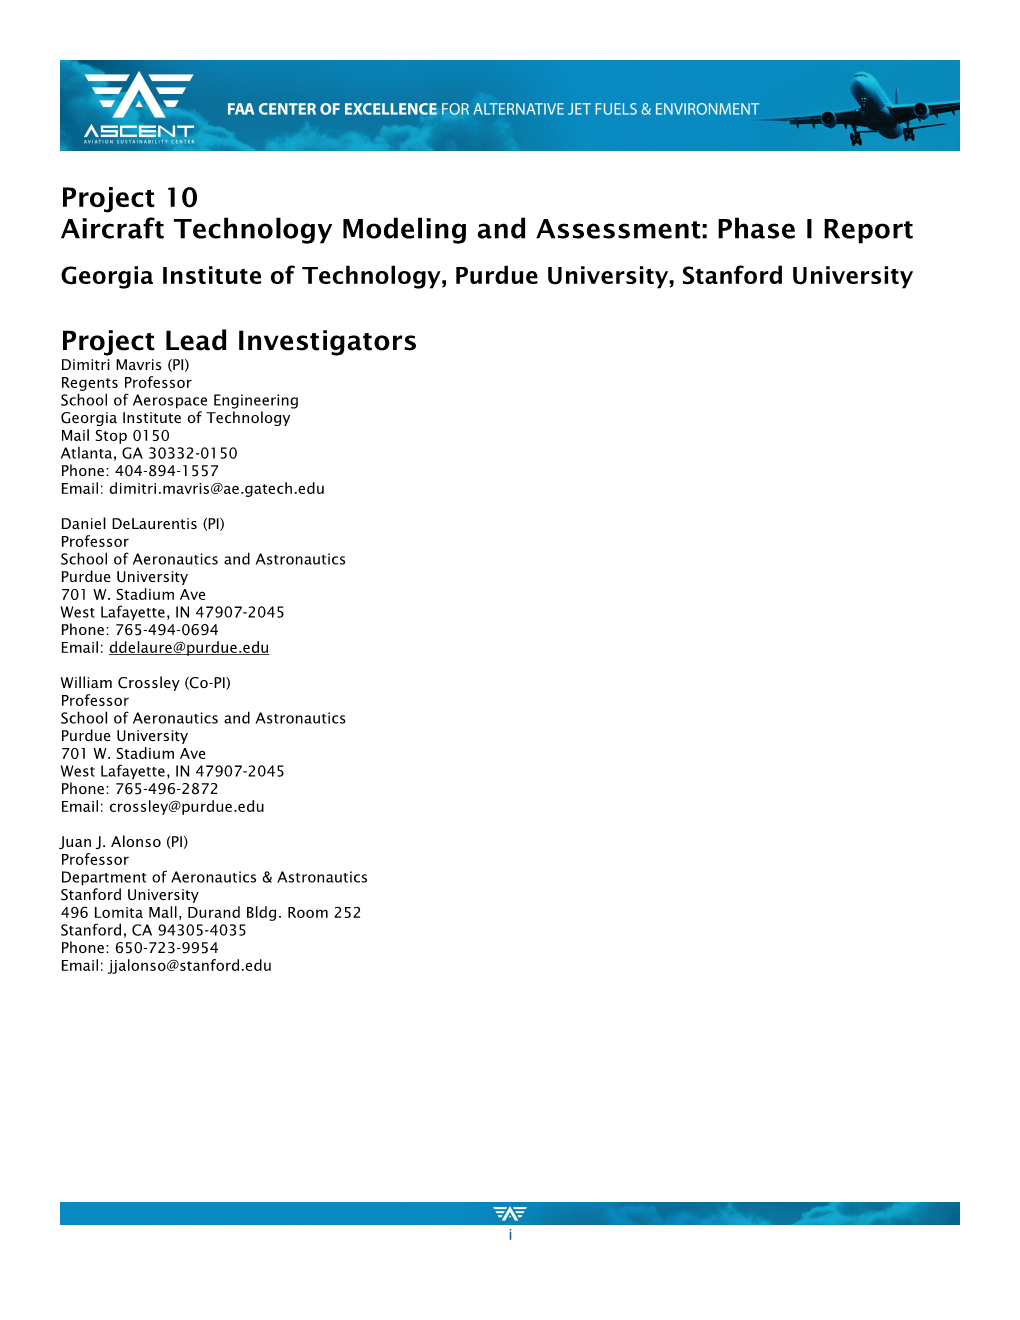 Project 10 Aircraft Technology Modeling and Assessment: Phase I Report